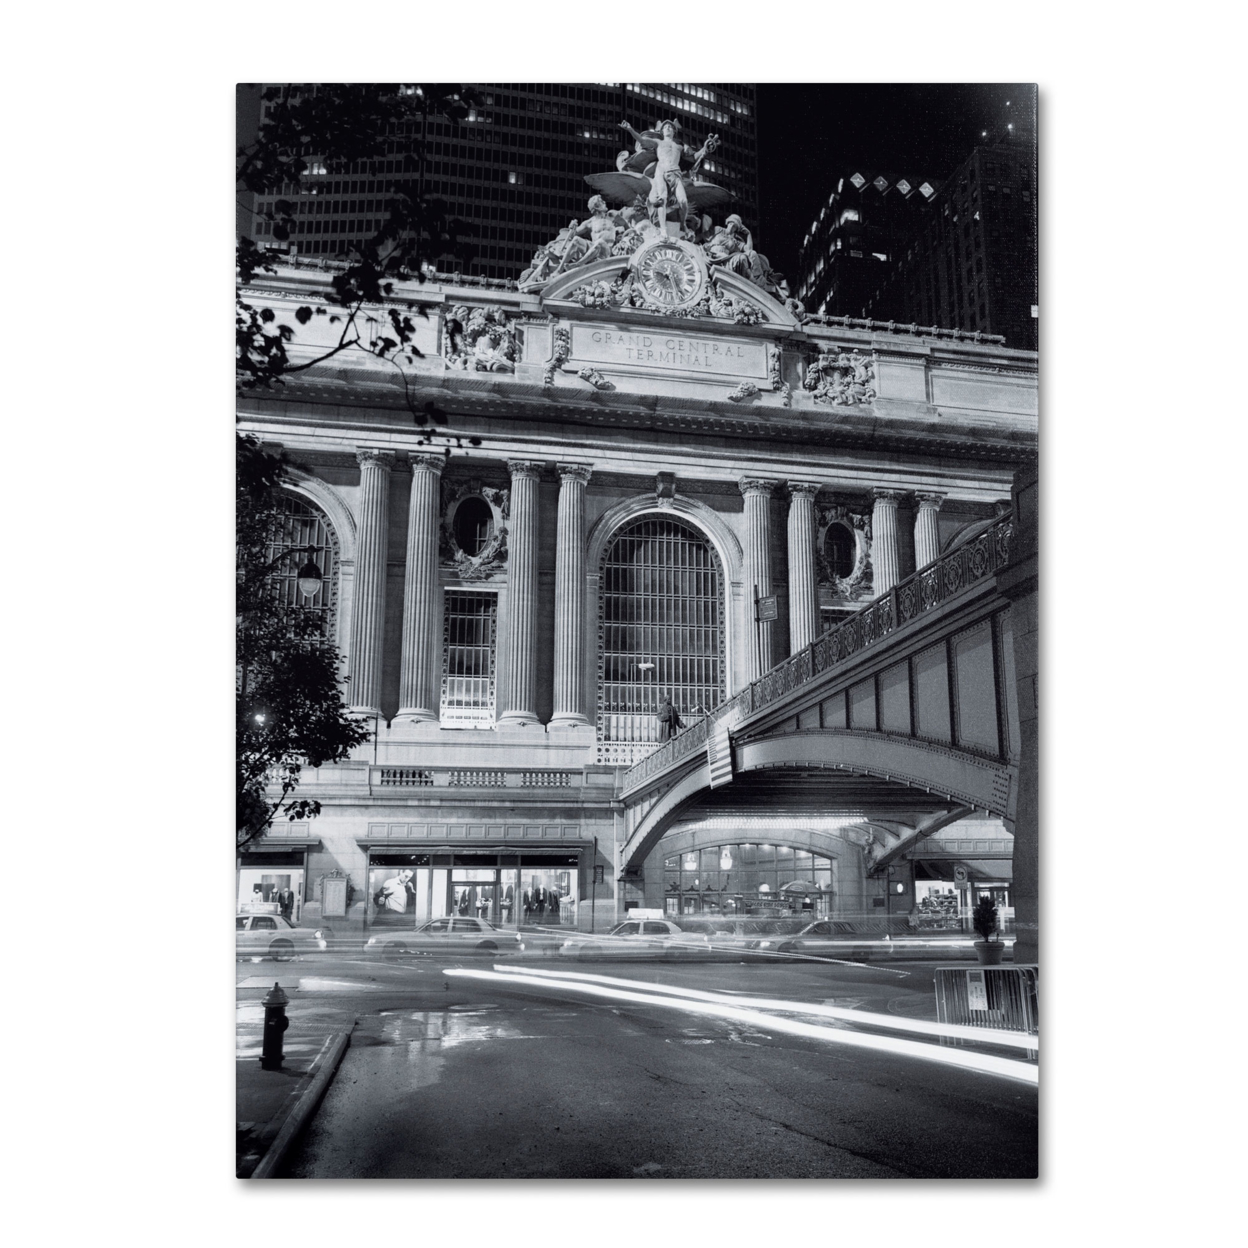 Chris Bliss 'Grand Central Night' Canvas Wall Art 35 X 47 Inches